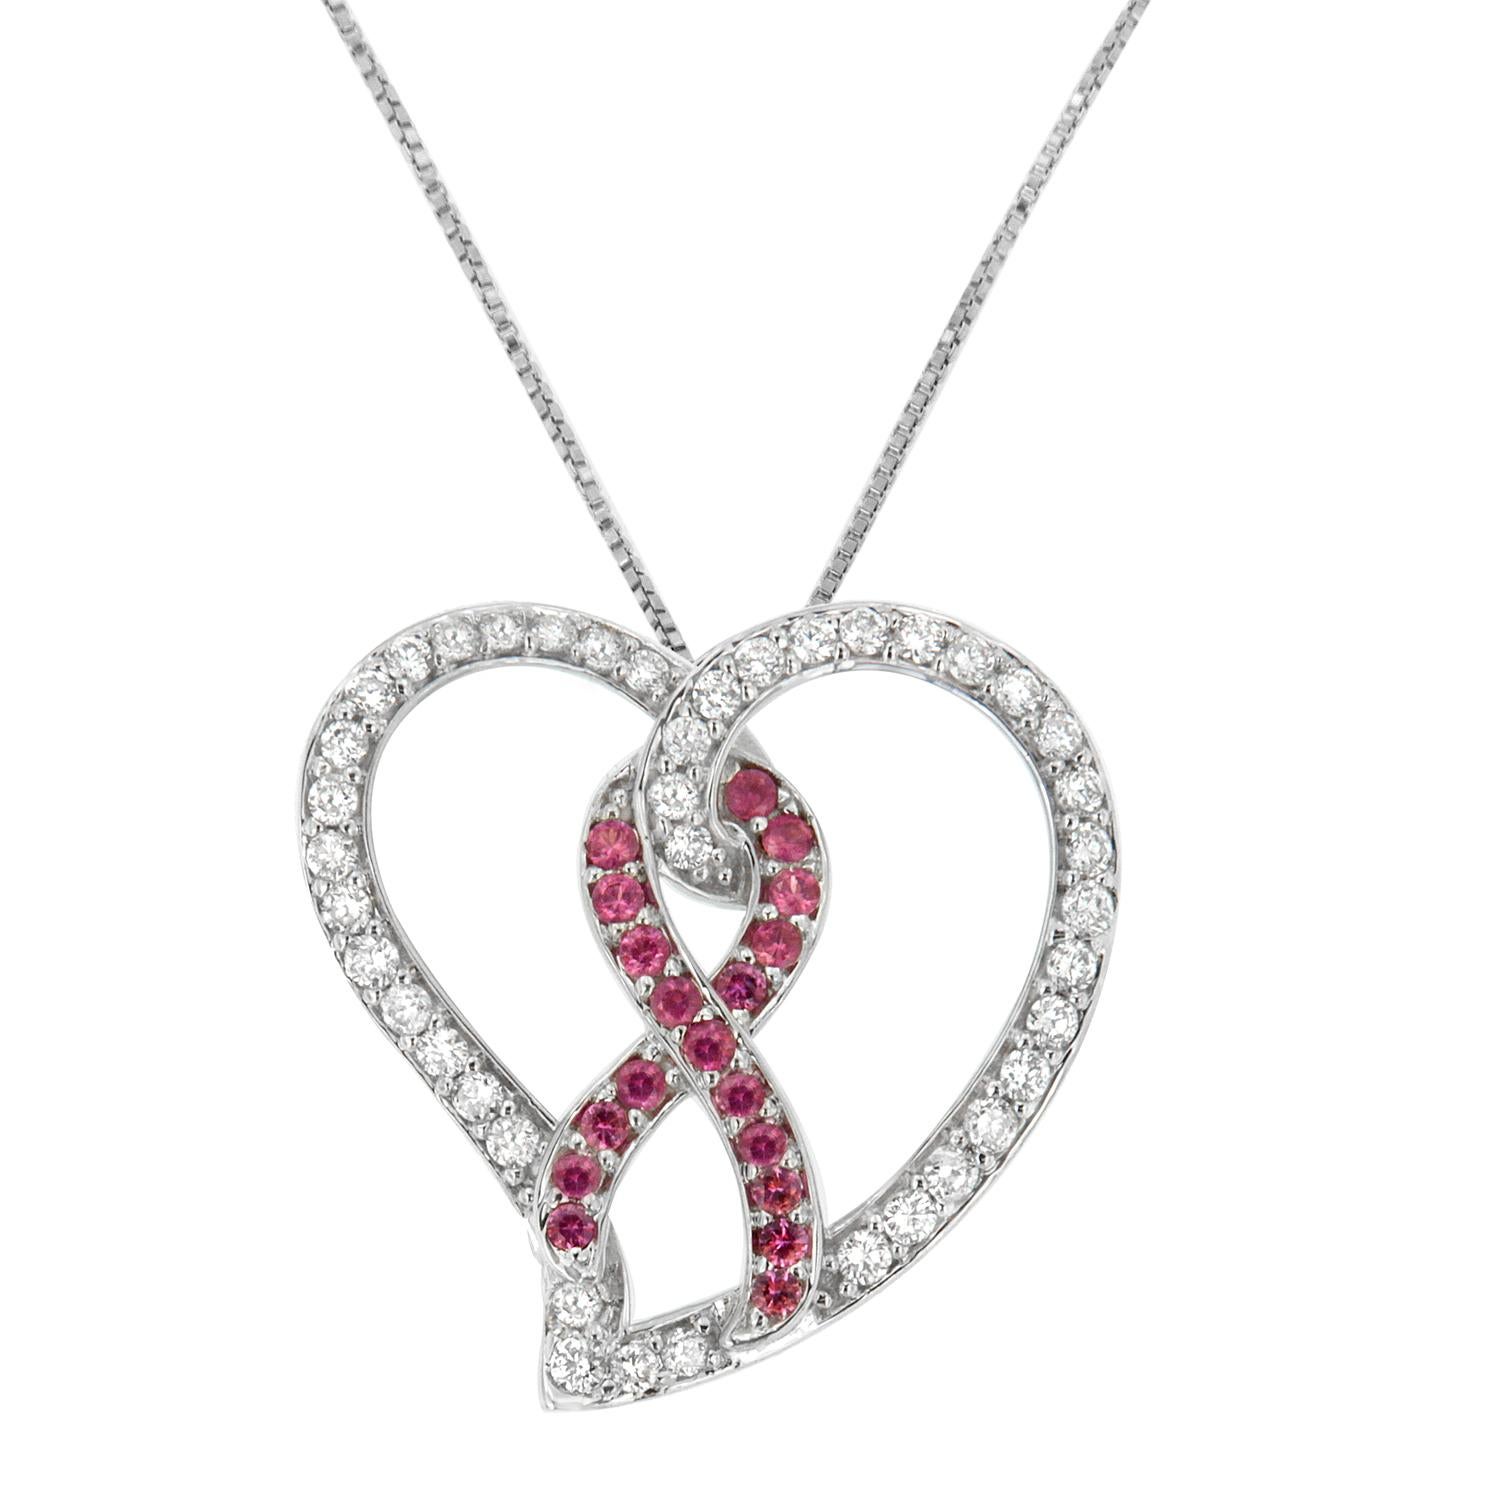 Brighten her gorgeous look with this stunning diamond pendant. Designed in the shape of a heart and featuring bow accent in the center, it is crafted of 14 karats white gold and polished high to shine. And, the embellishment with white and pink